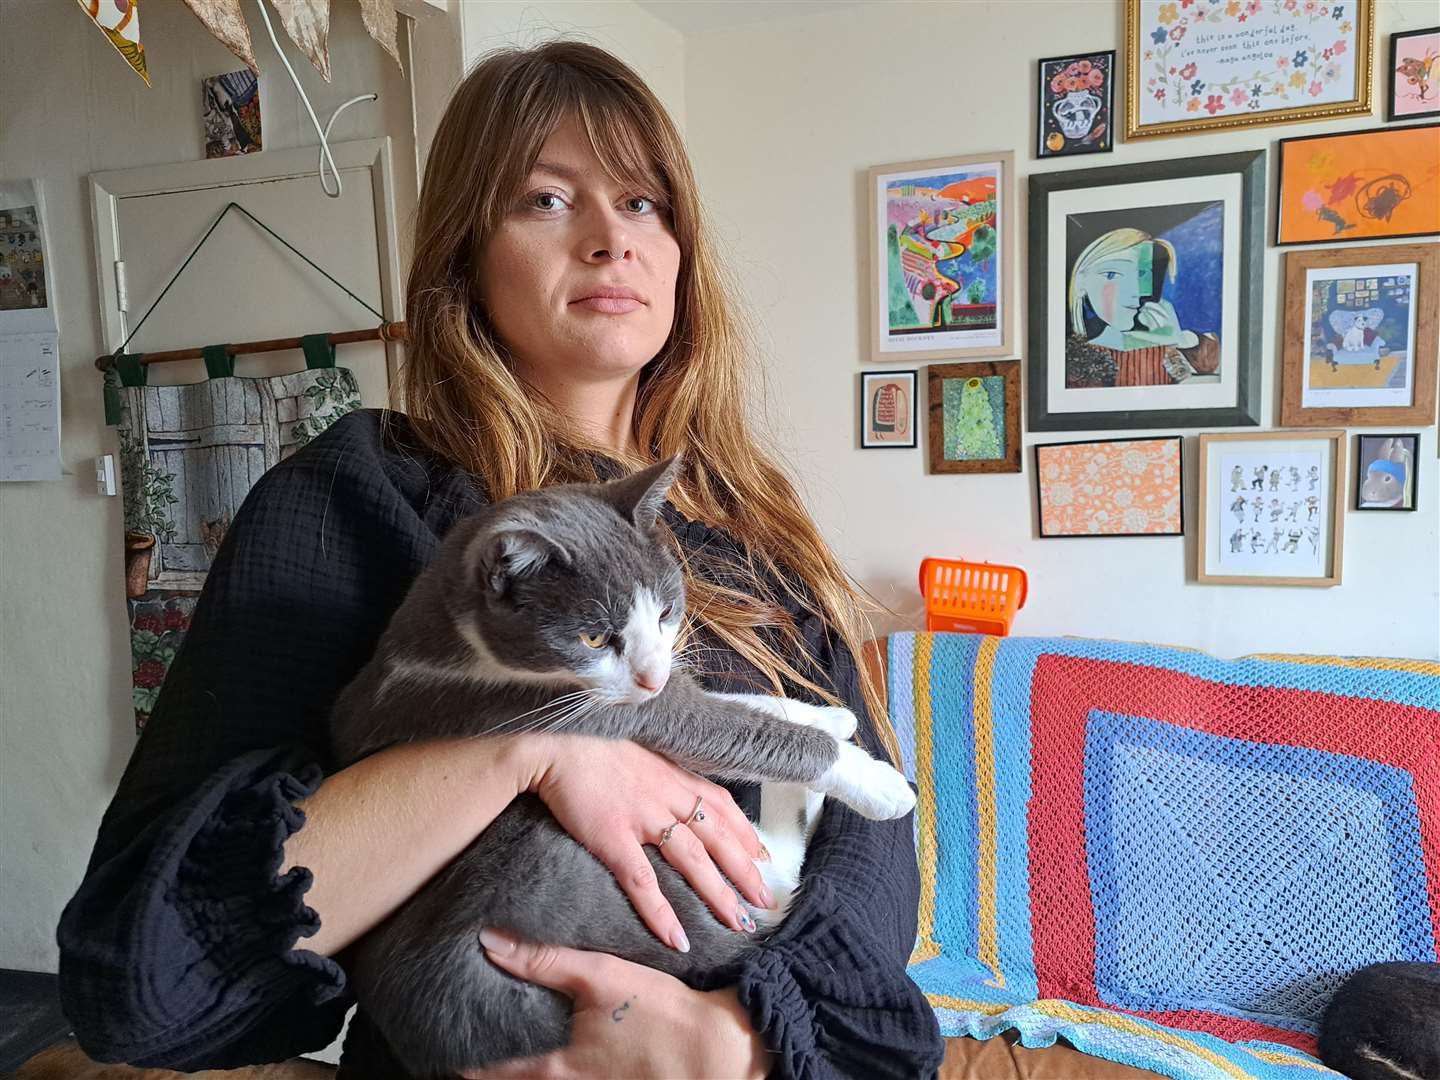 Miss Craft, Griffins owner, has thanked everyone for keeping an eye out for her beloved pet